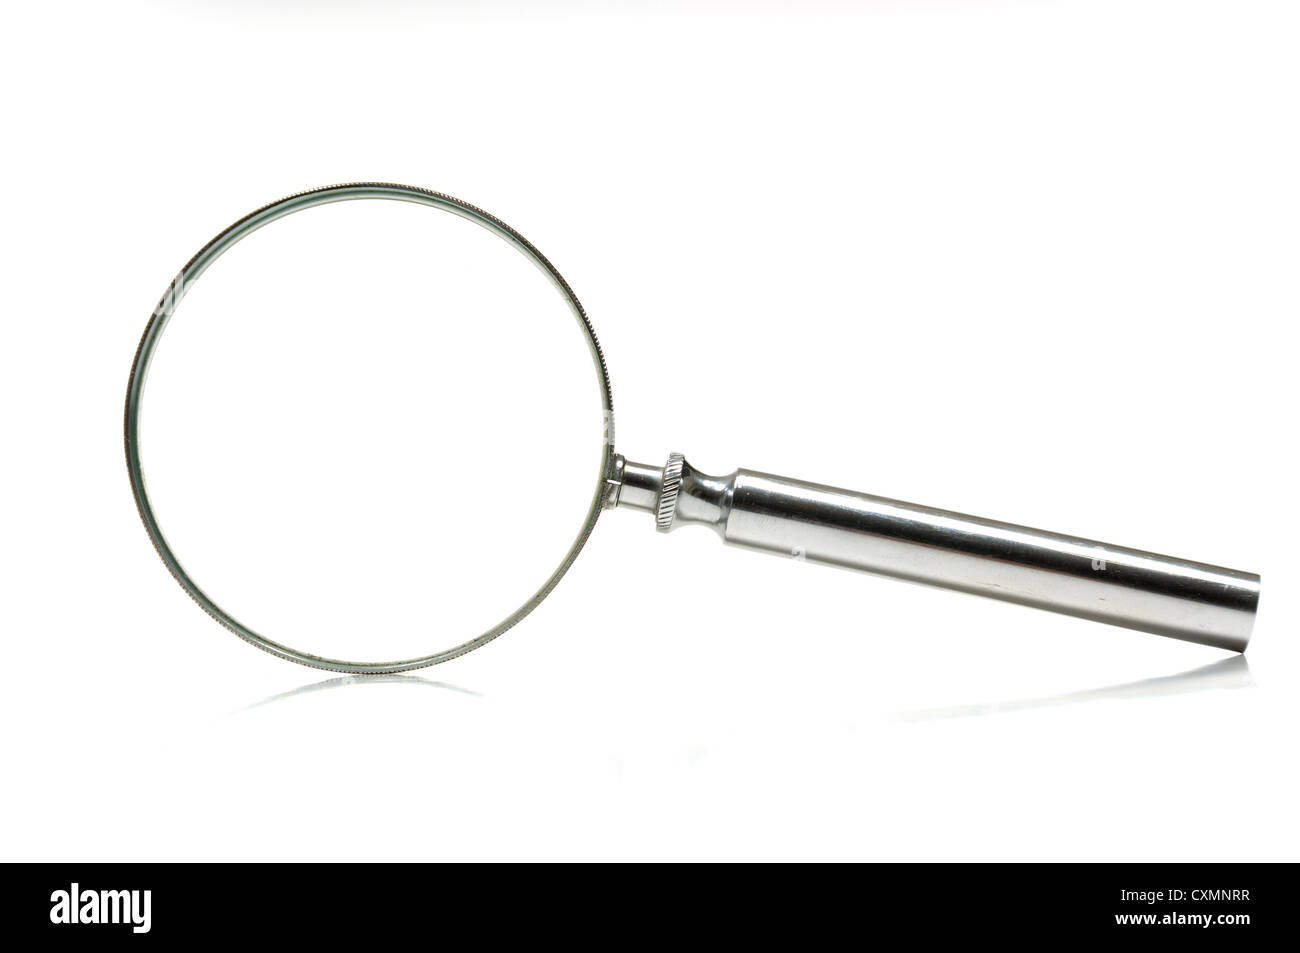 Old antique magnifying glass on white background Stock Photo